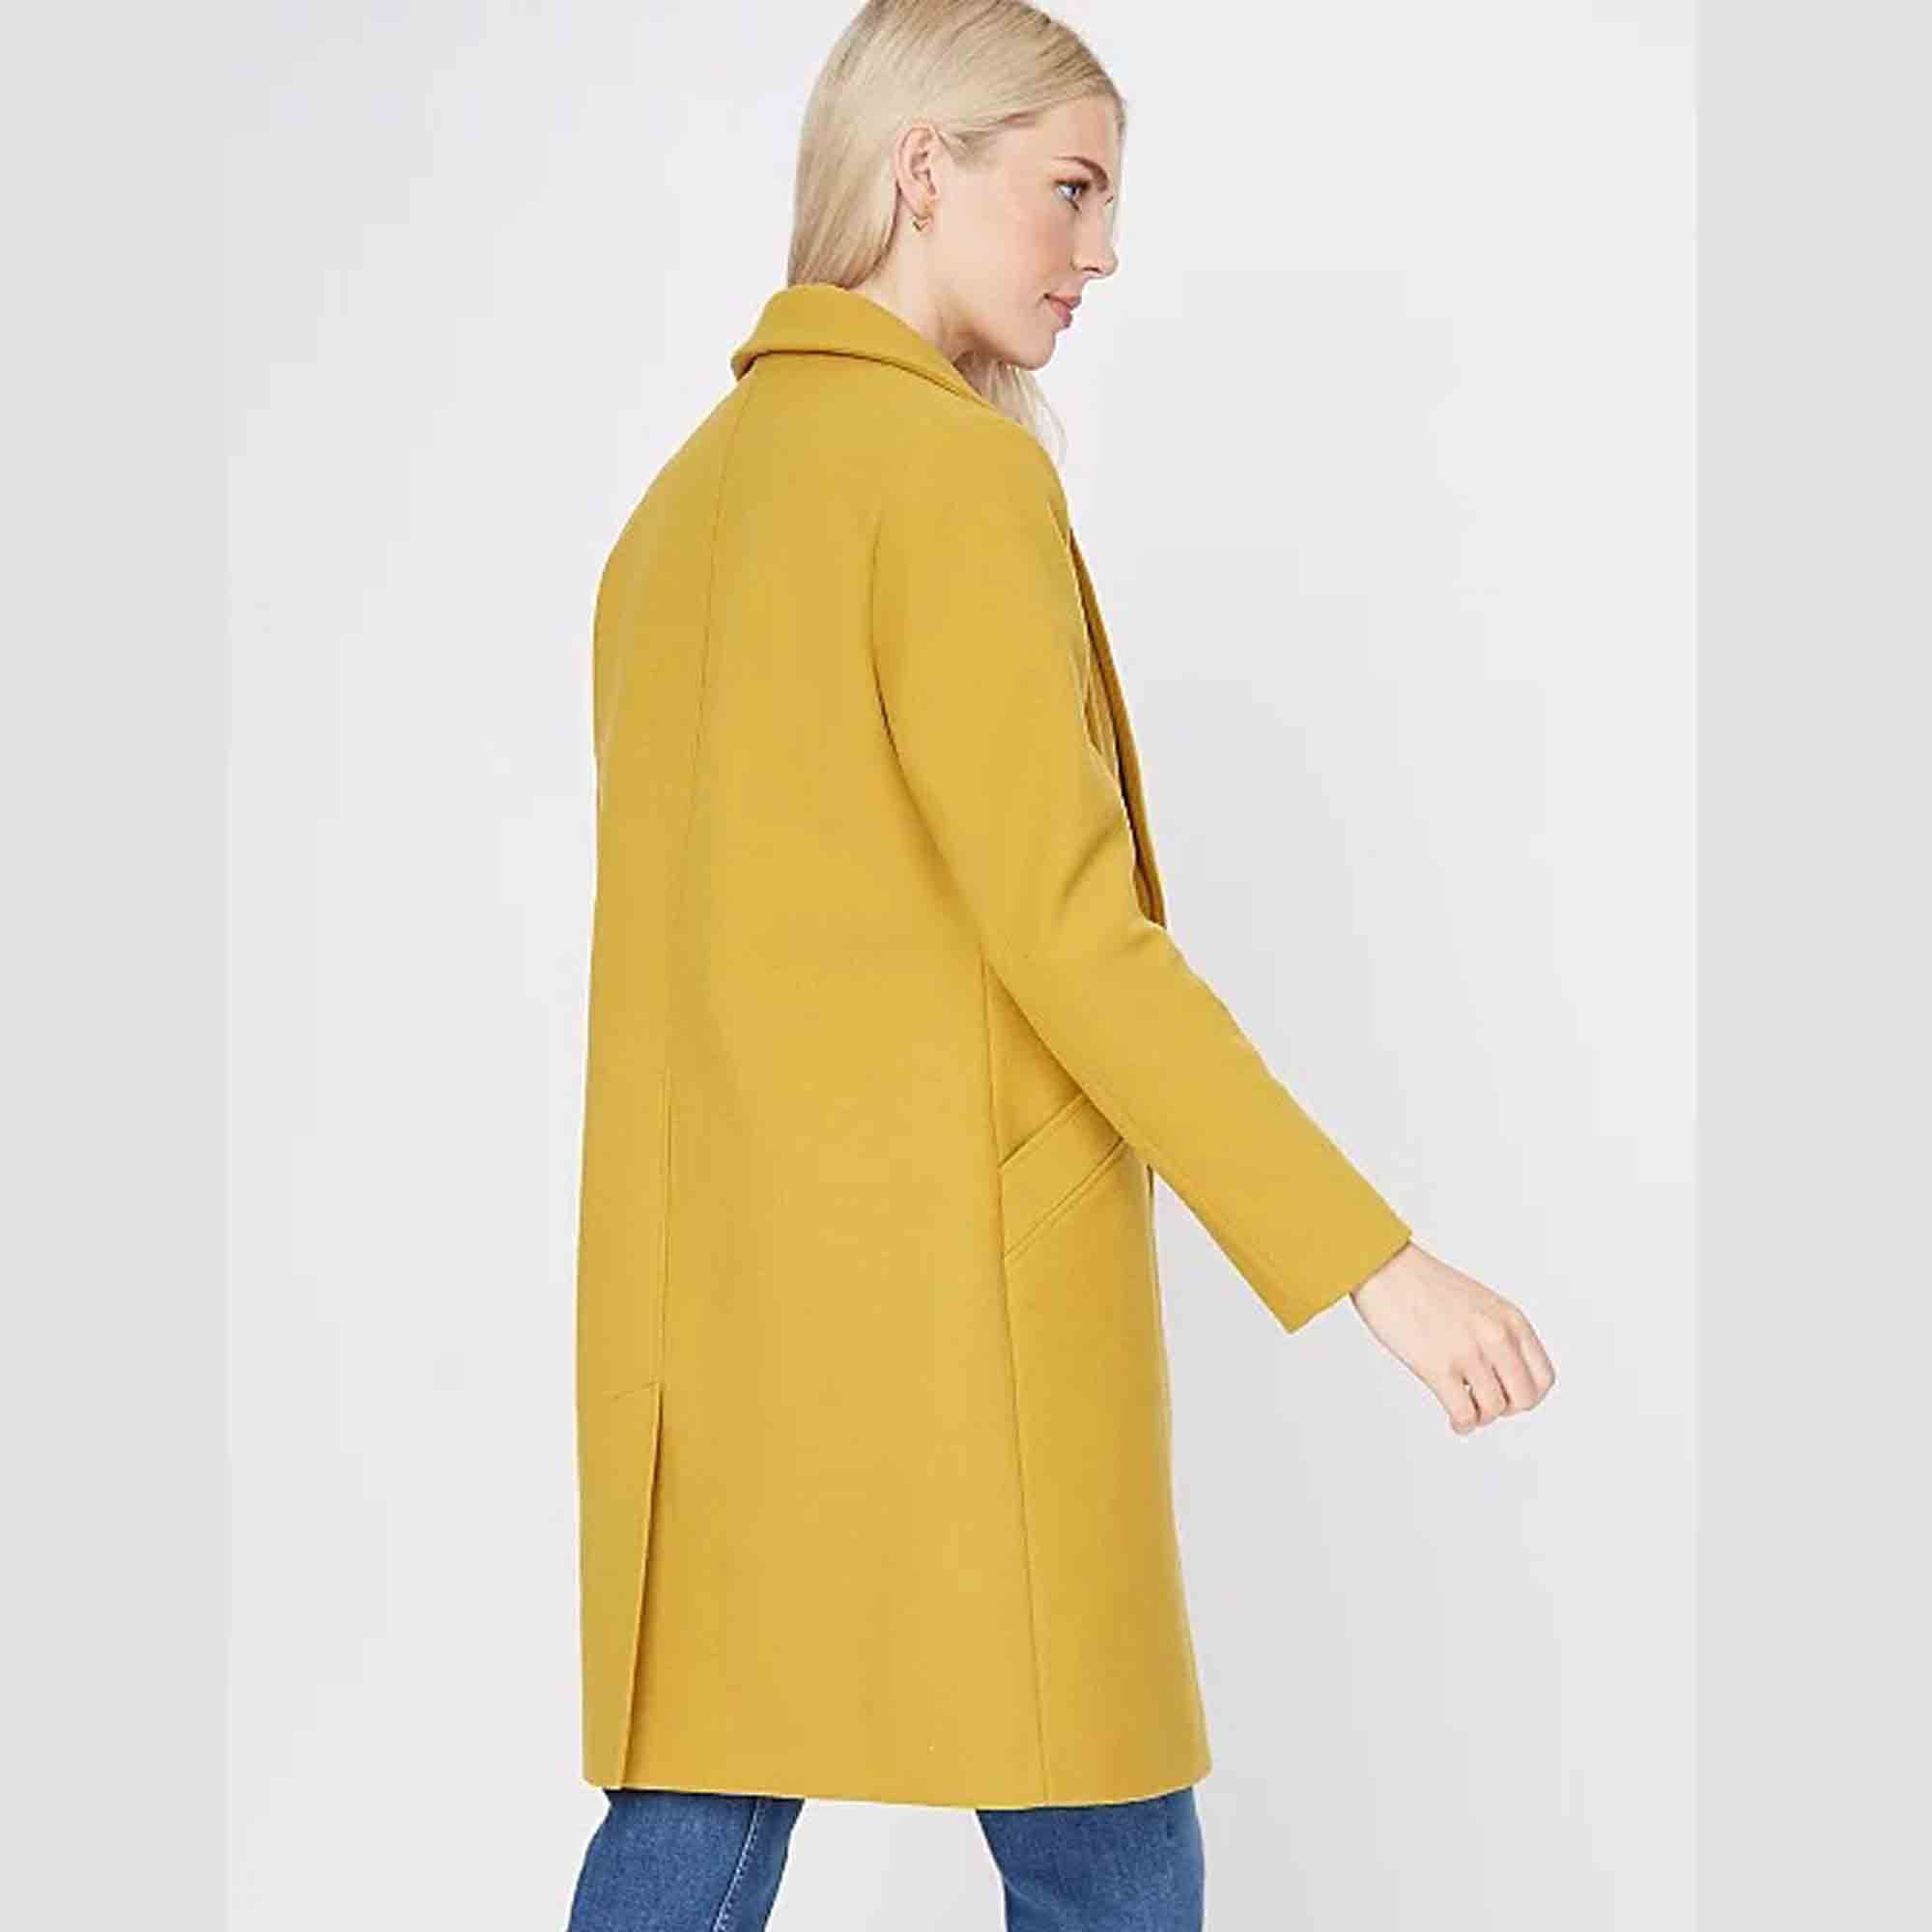 New Mustard Yellow Collared Longline Formal Coat Women For | Etsy